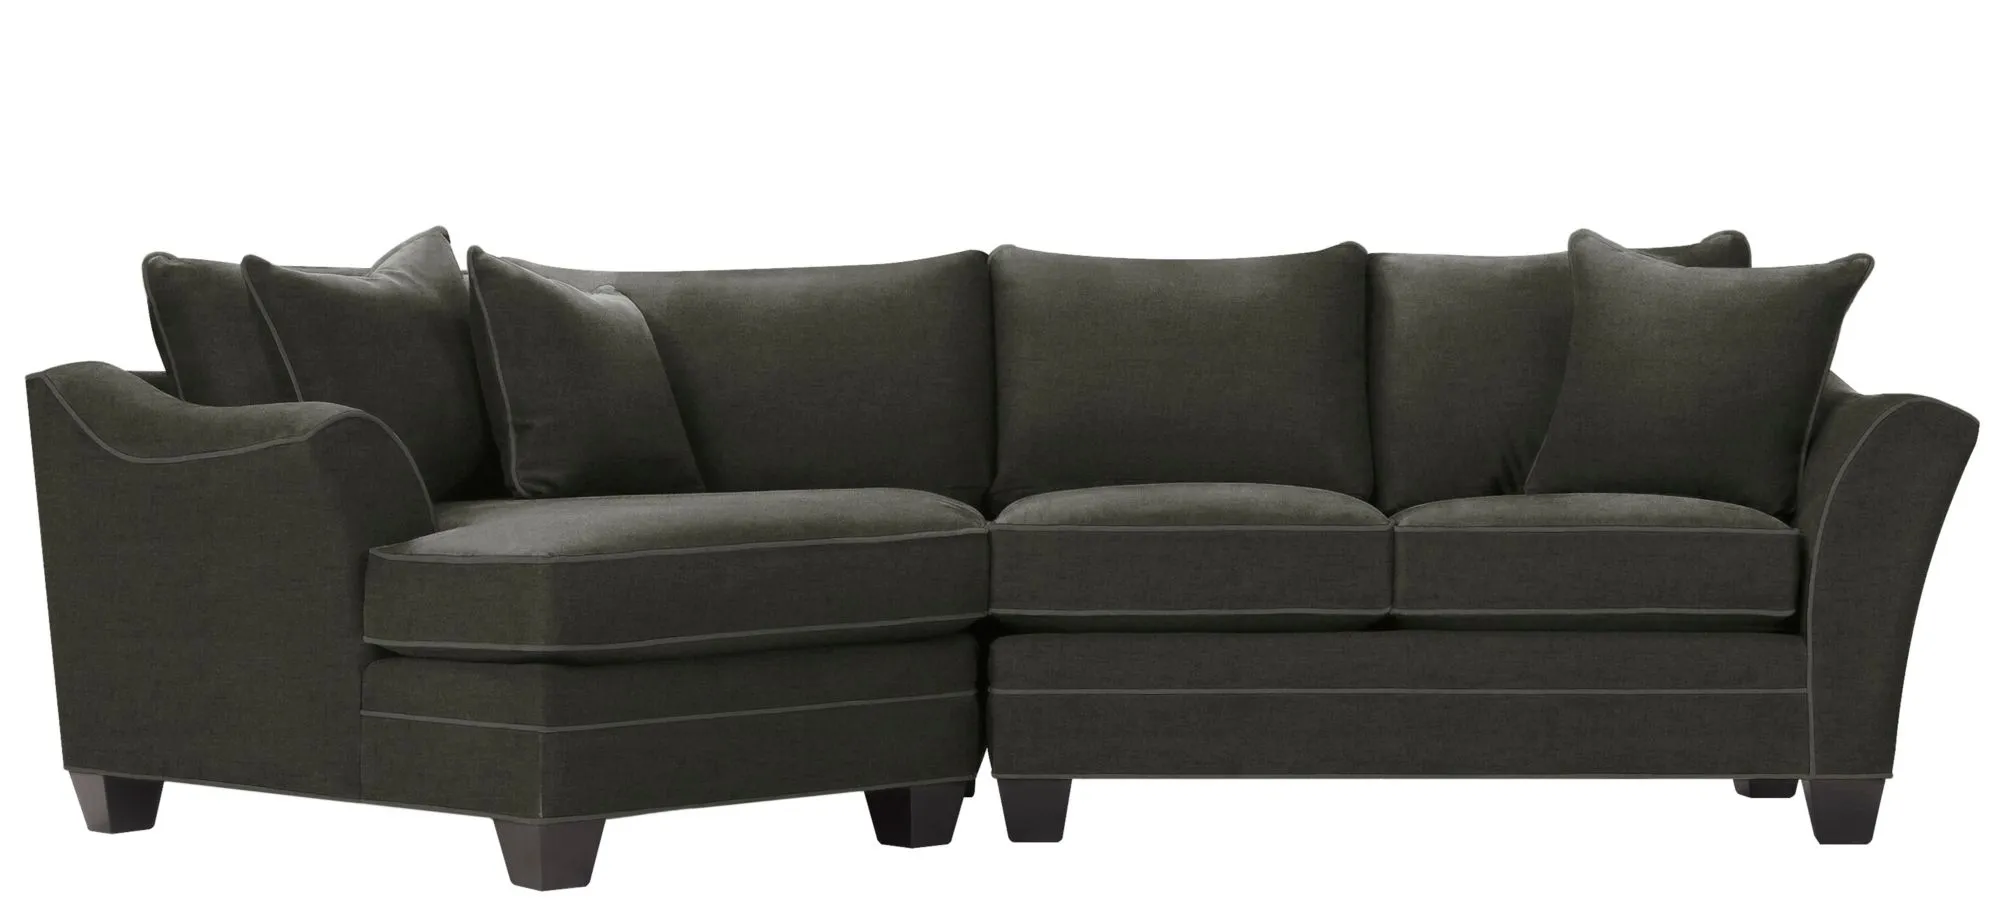 Foresthill 2-pc. Left Hand Cuddler Sectional Sofa in Santa Rosa Slate by H.M. Richards